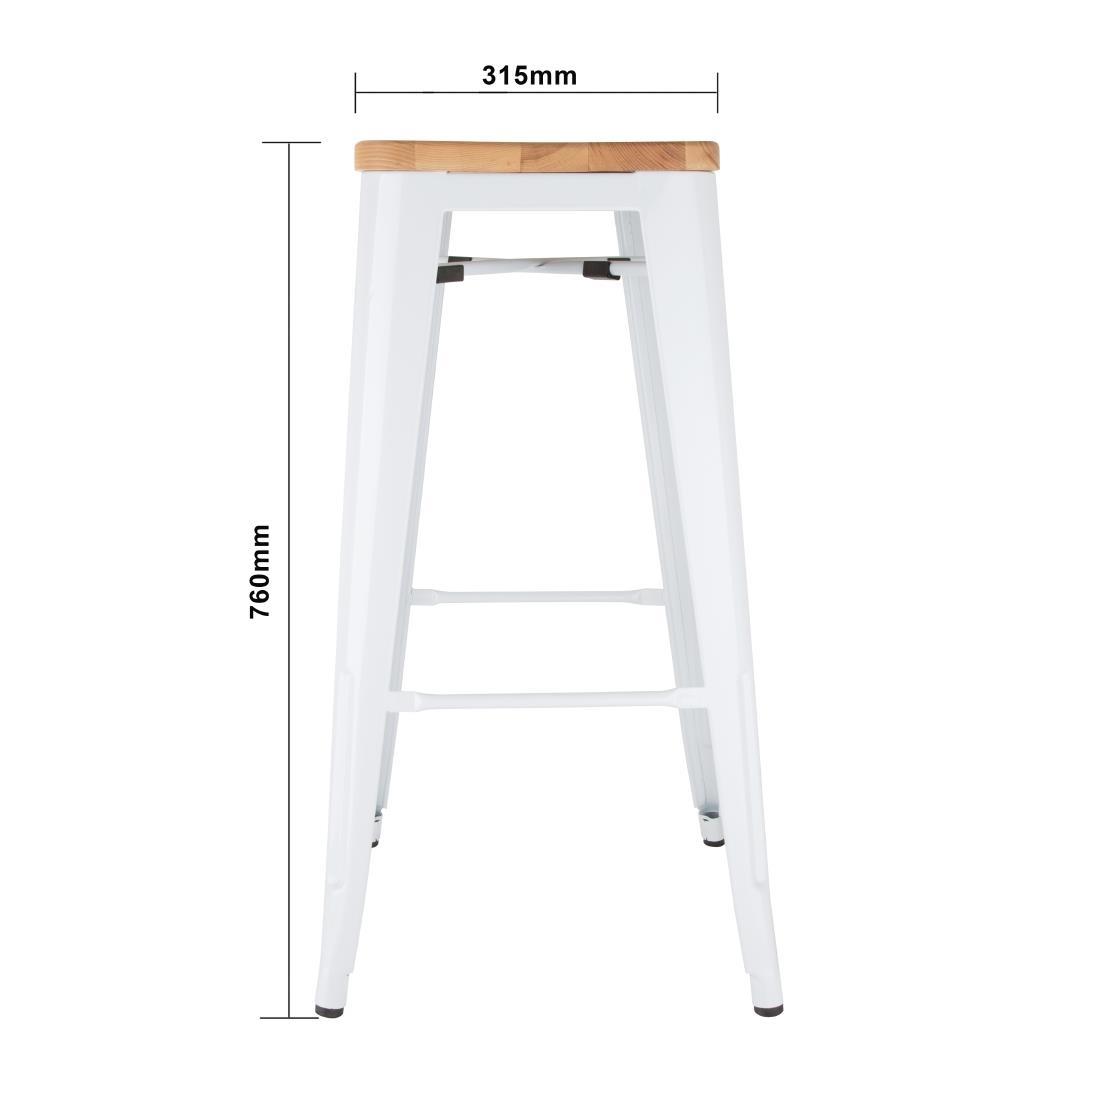 Bolero Bistro High Stools with Wooden Seatpad White (Pack of 4) - DW739  - 6